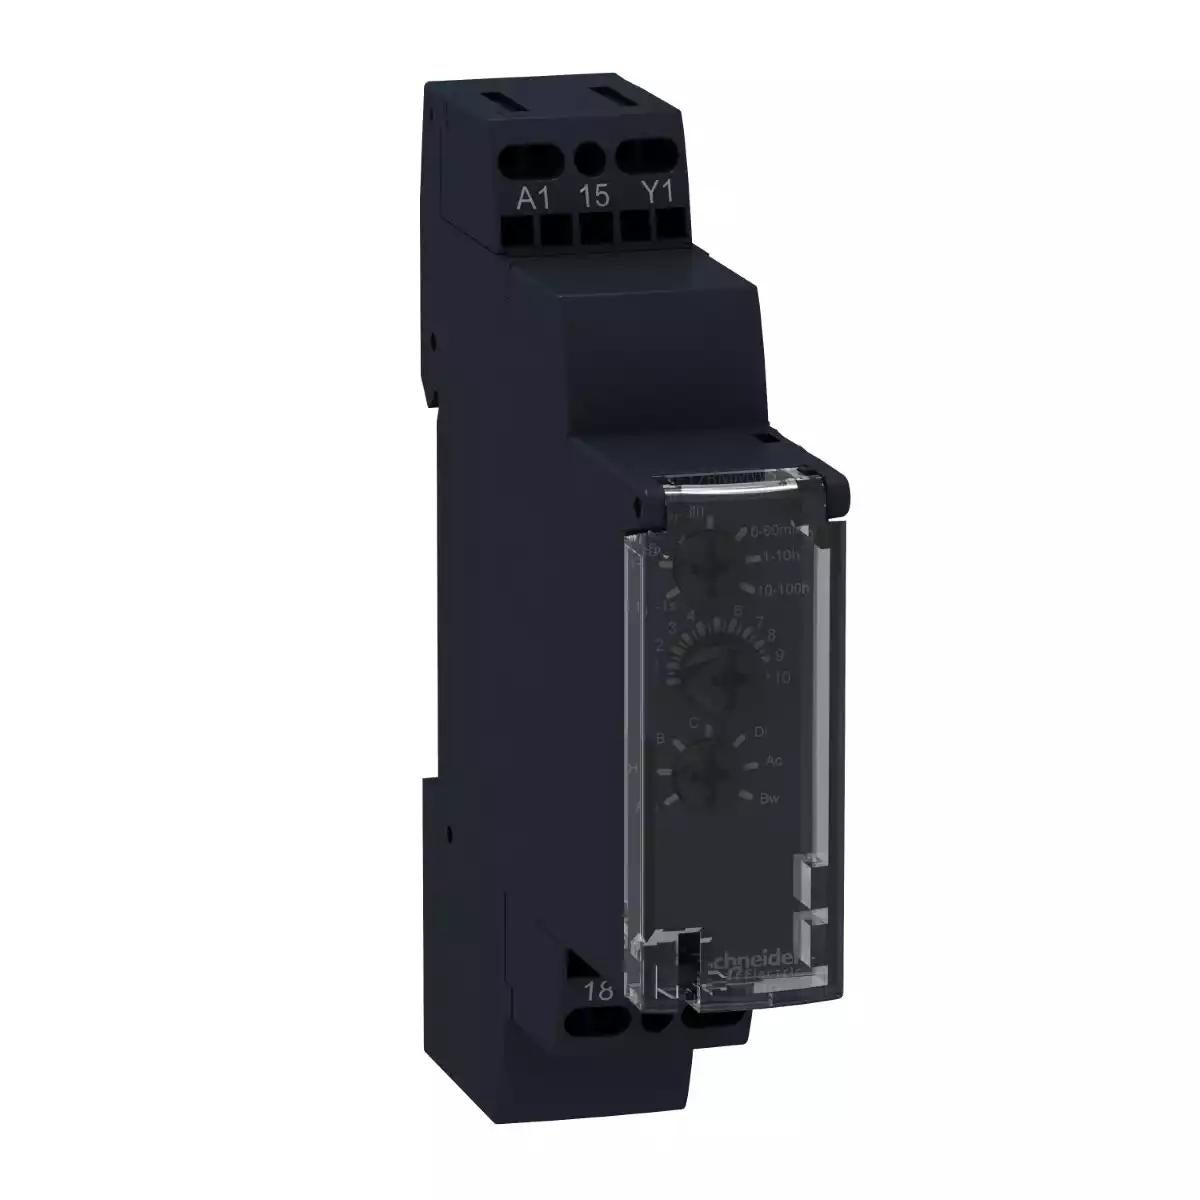 Schneider Electric Zelio Time time delay relay 10 functions - 1 s..100 h - 12..240 V AC/DC - 1 OC